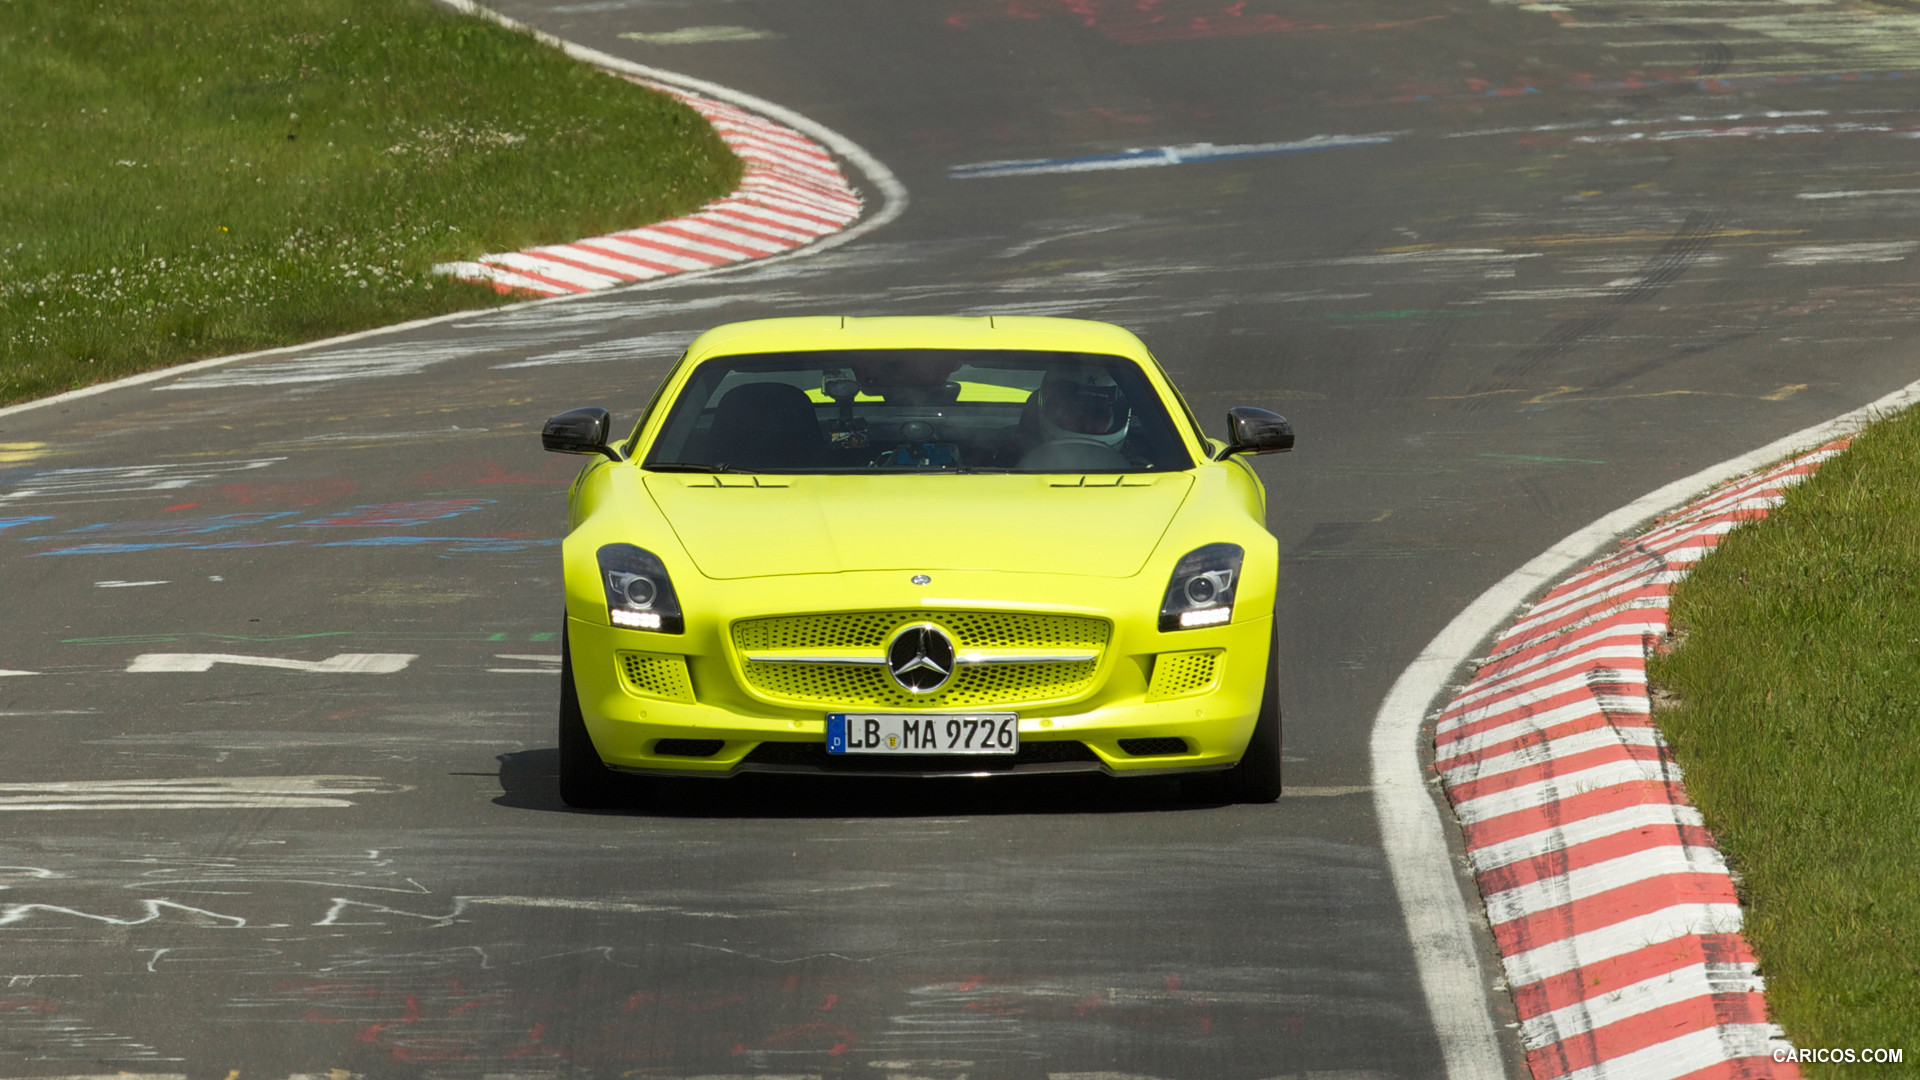 2014 Mercedes-Benz SLS AMG Coupe Electric Drive, Yellow at Nürburgring   - Front, #43 of 47